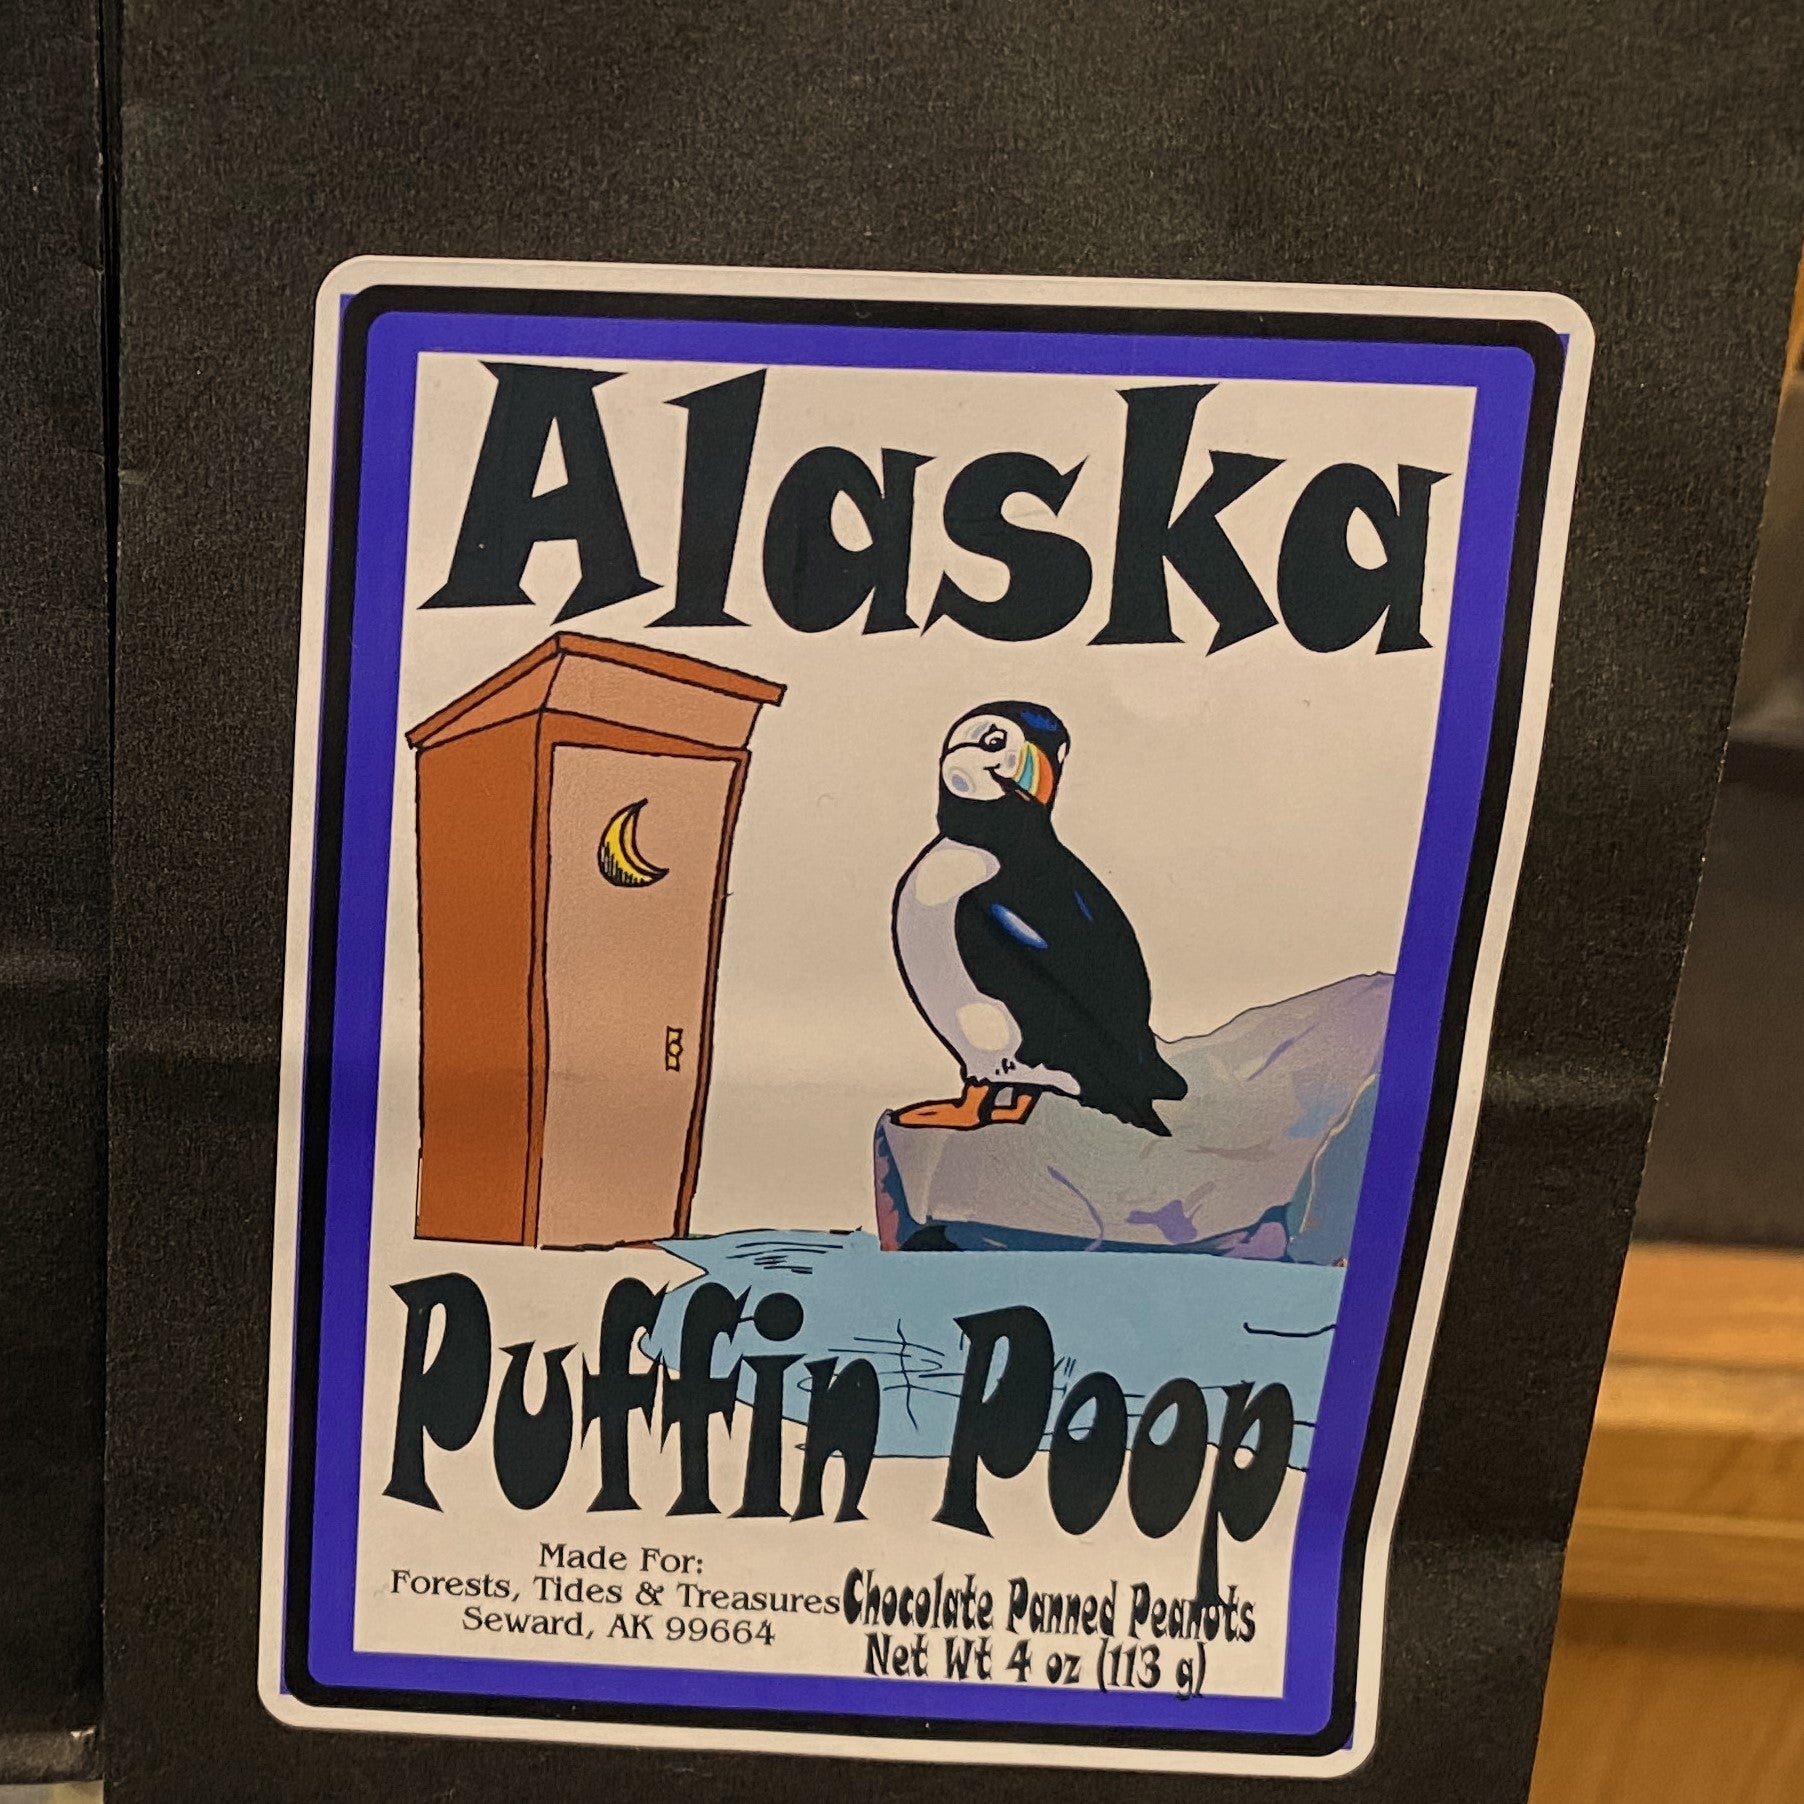 Puffin Poop Candy